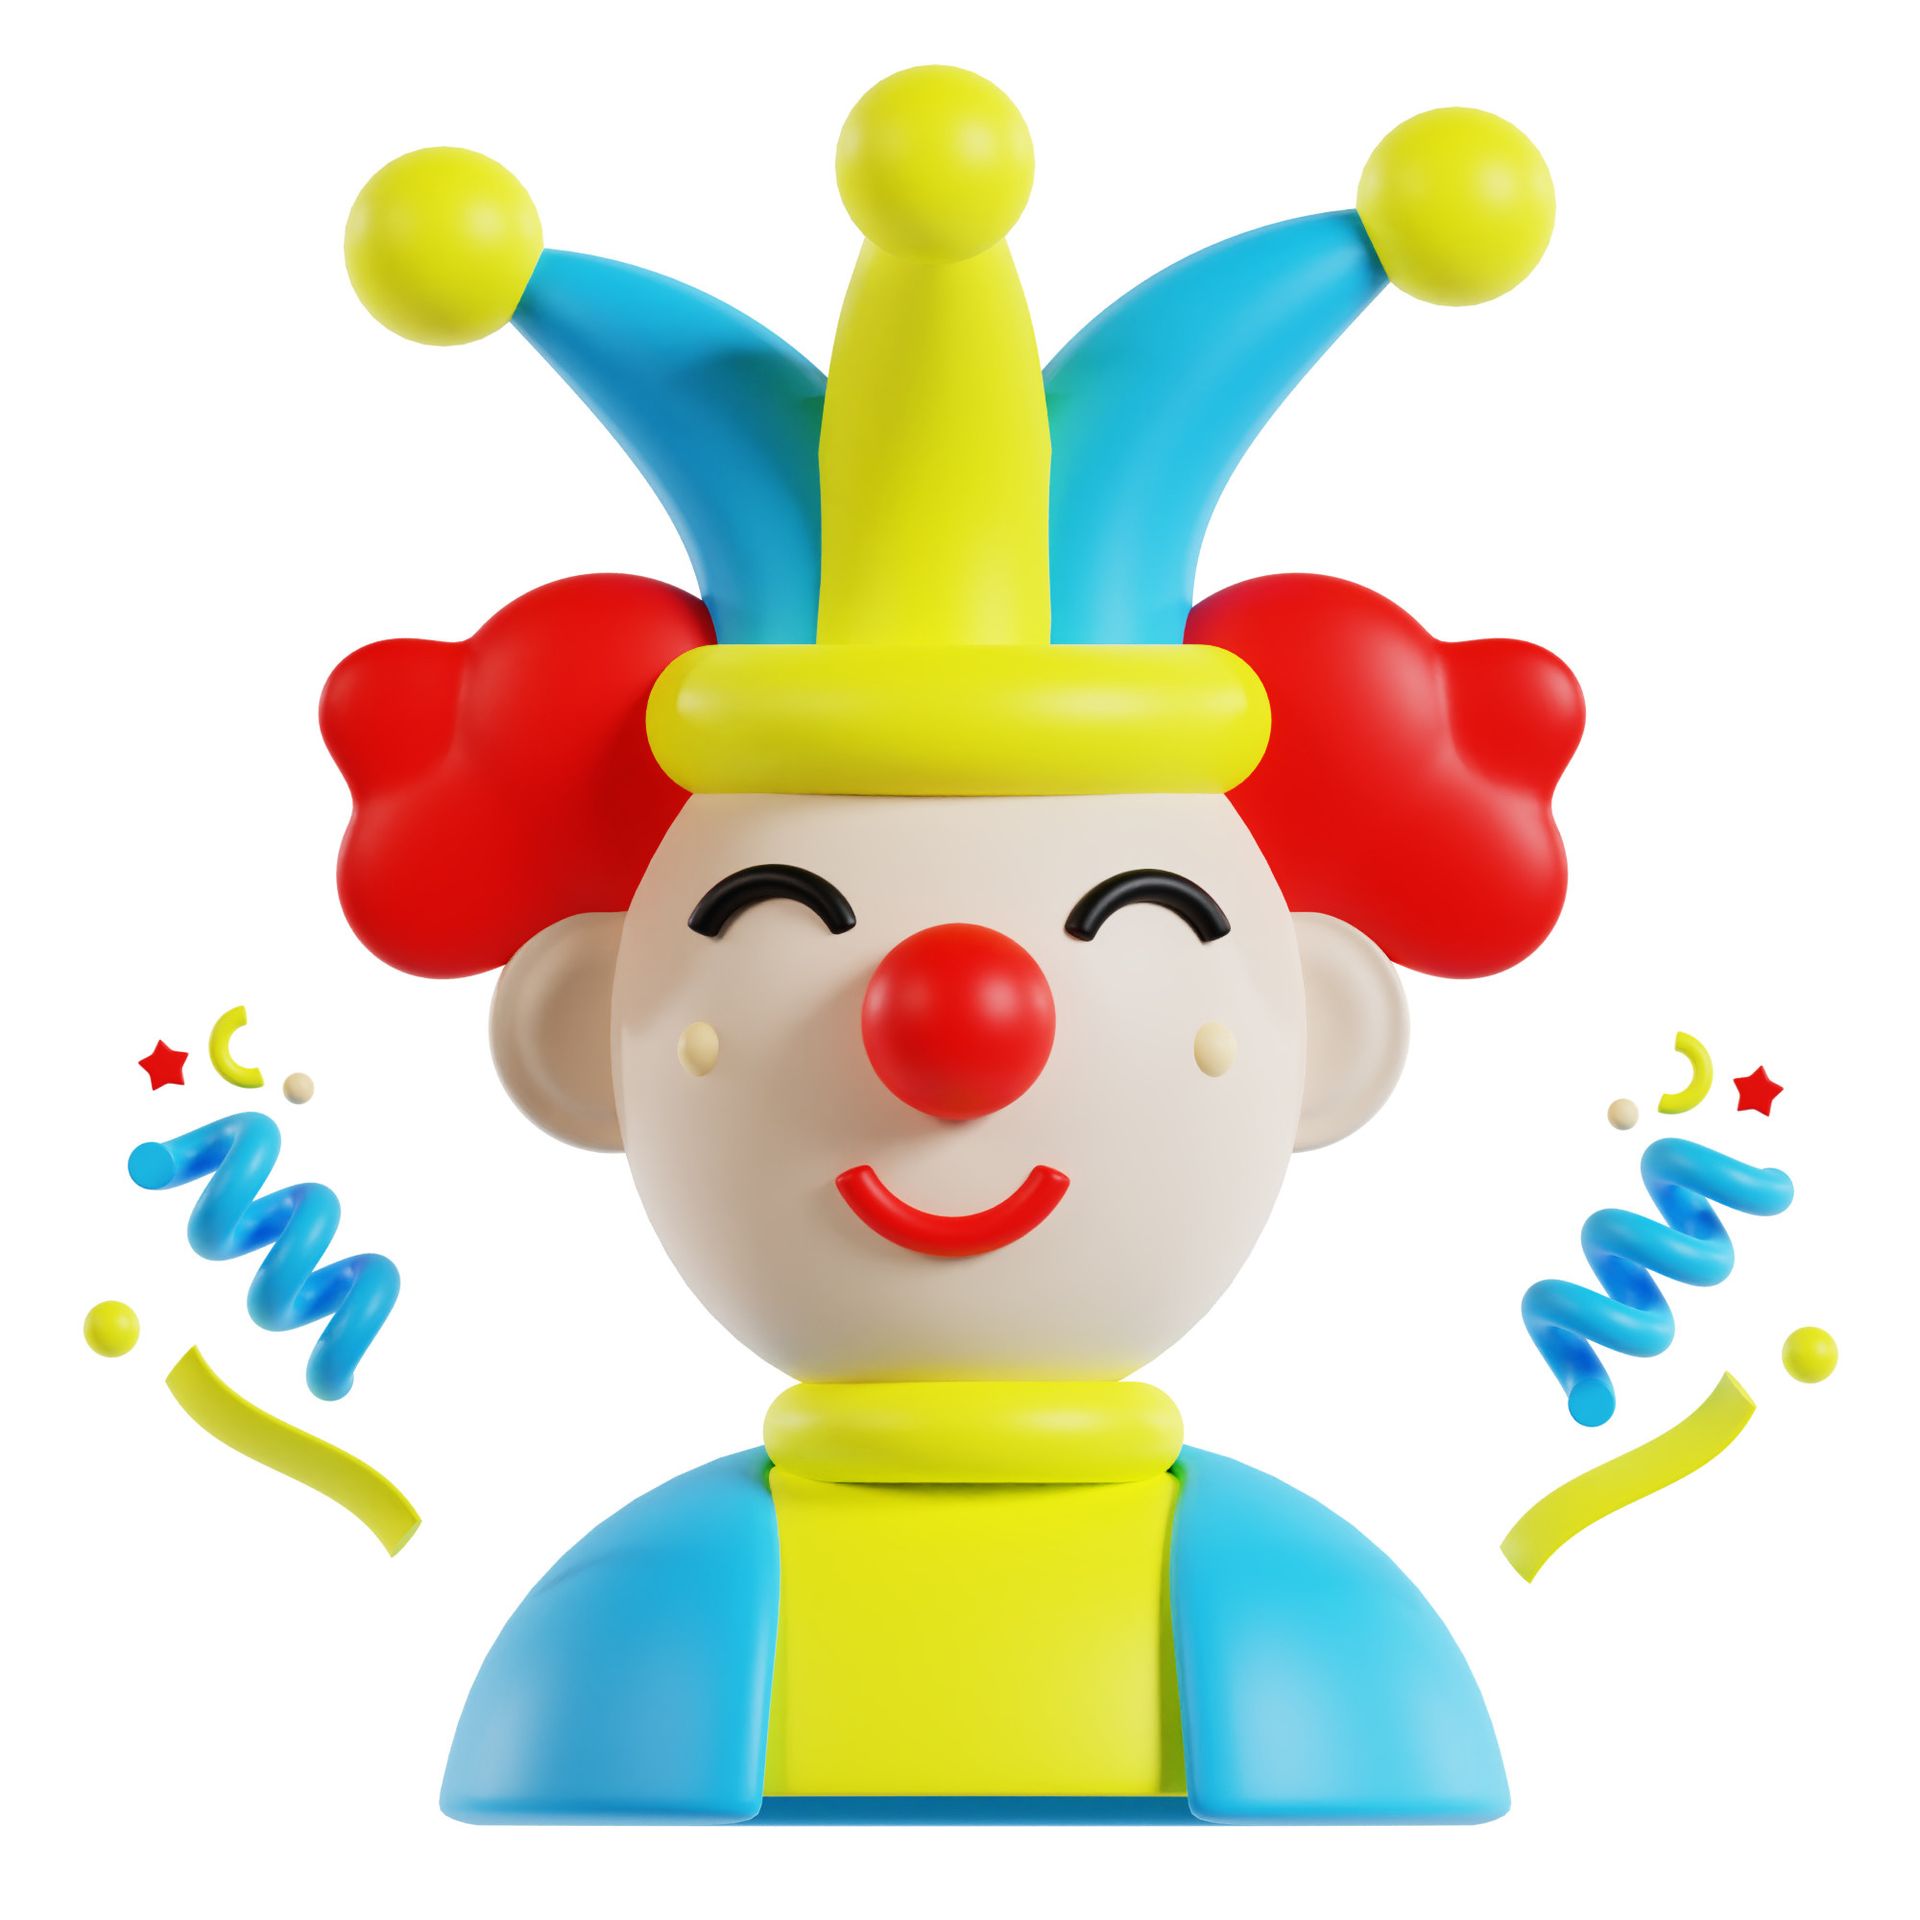 A clown with a yellow hat and red hair is smiling.